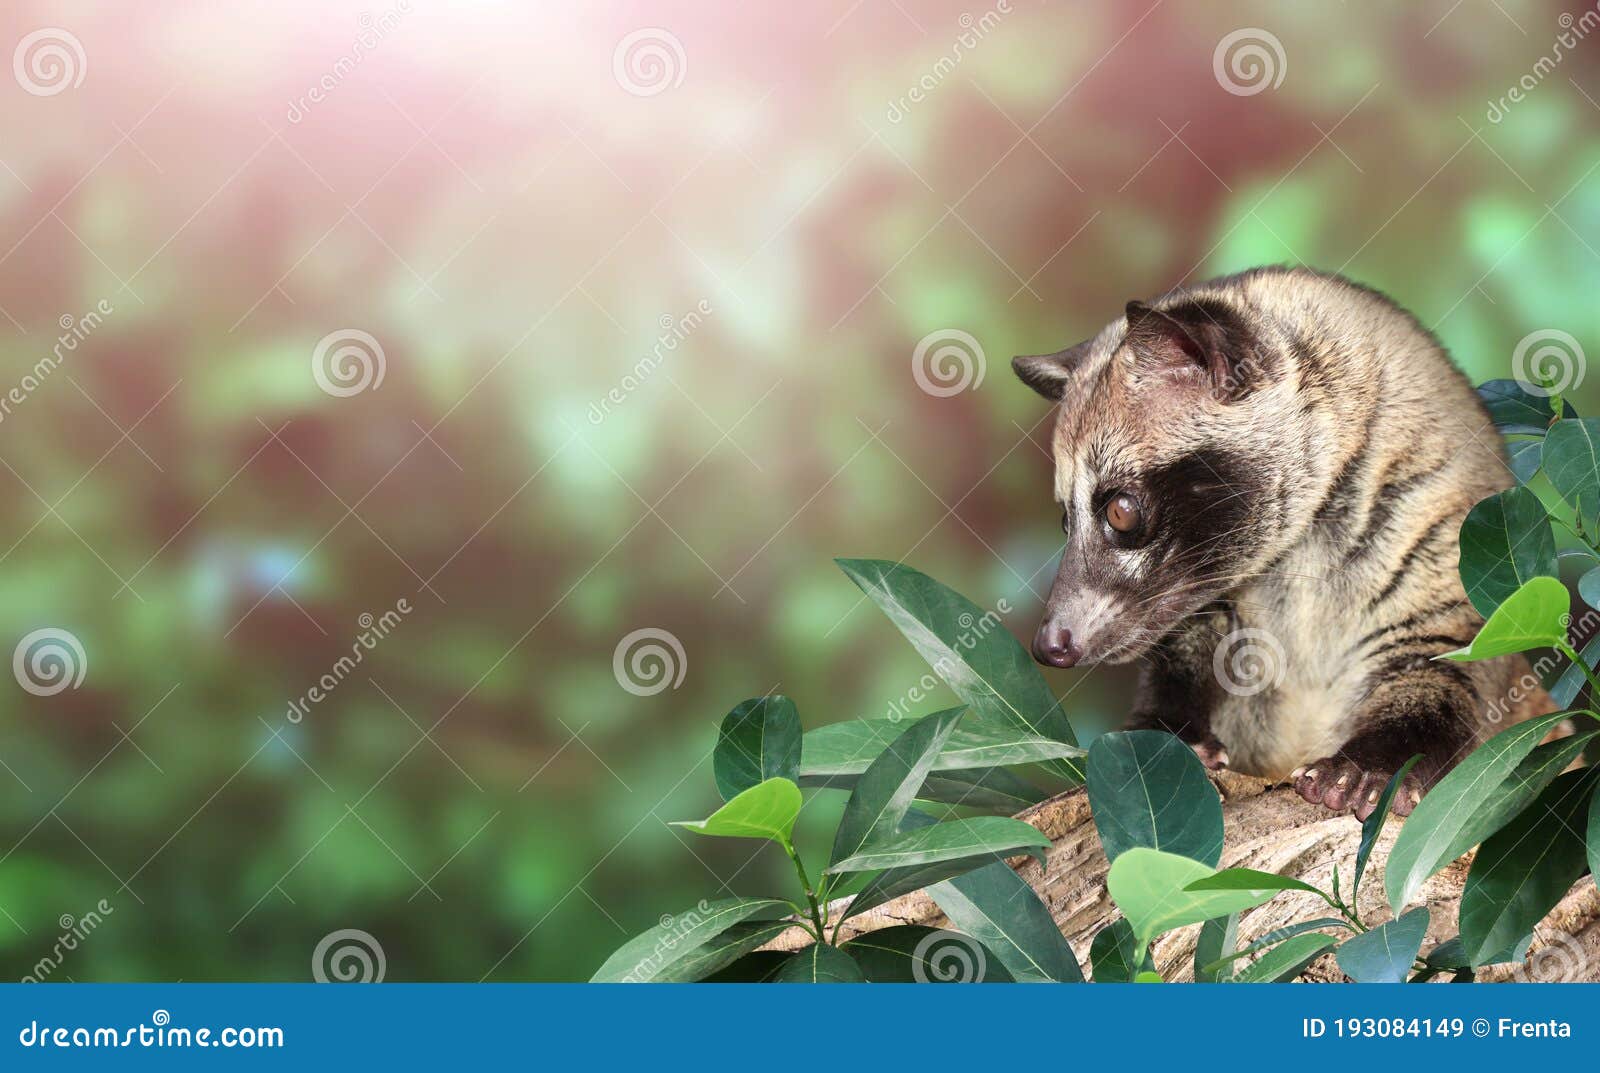 504 Asian Palm Civet Photos Free Royalty Free Stock Photos From Dreamstime